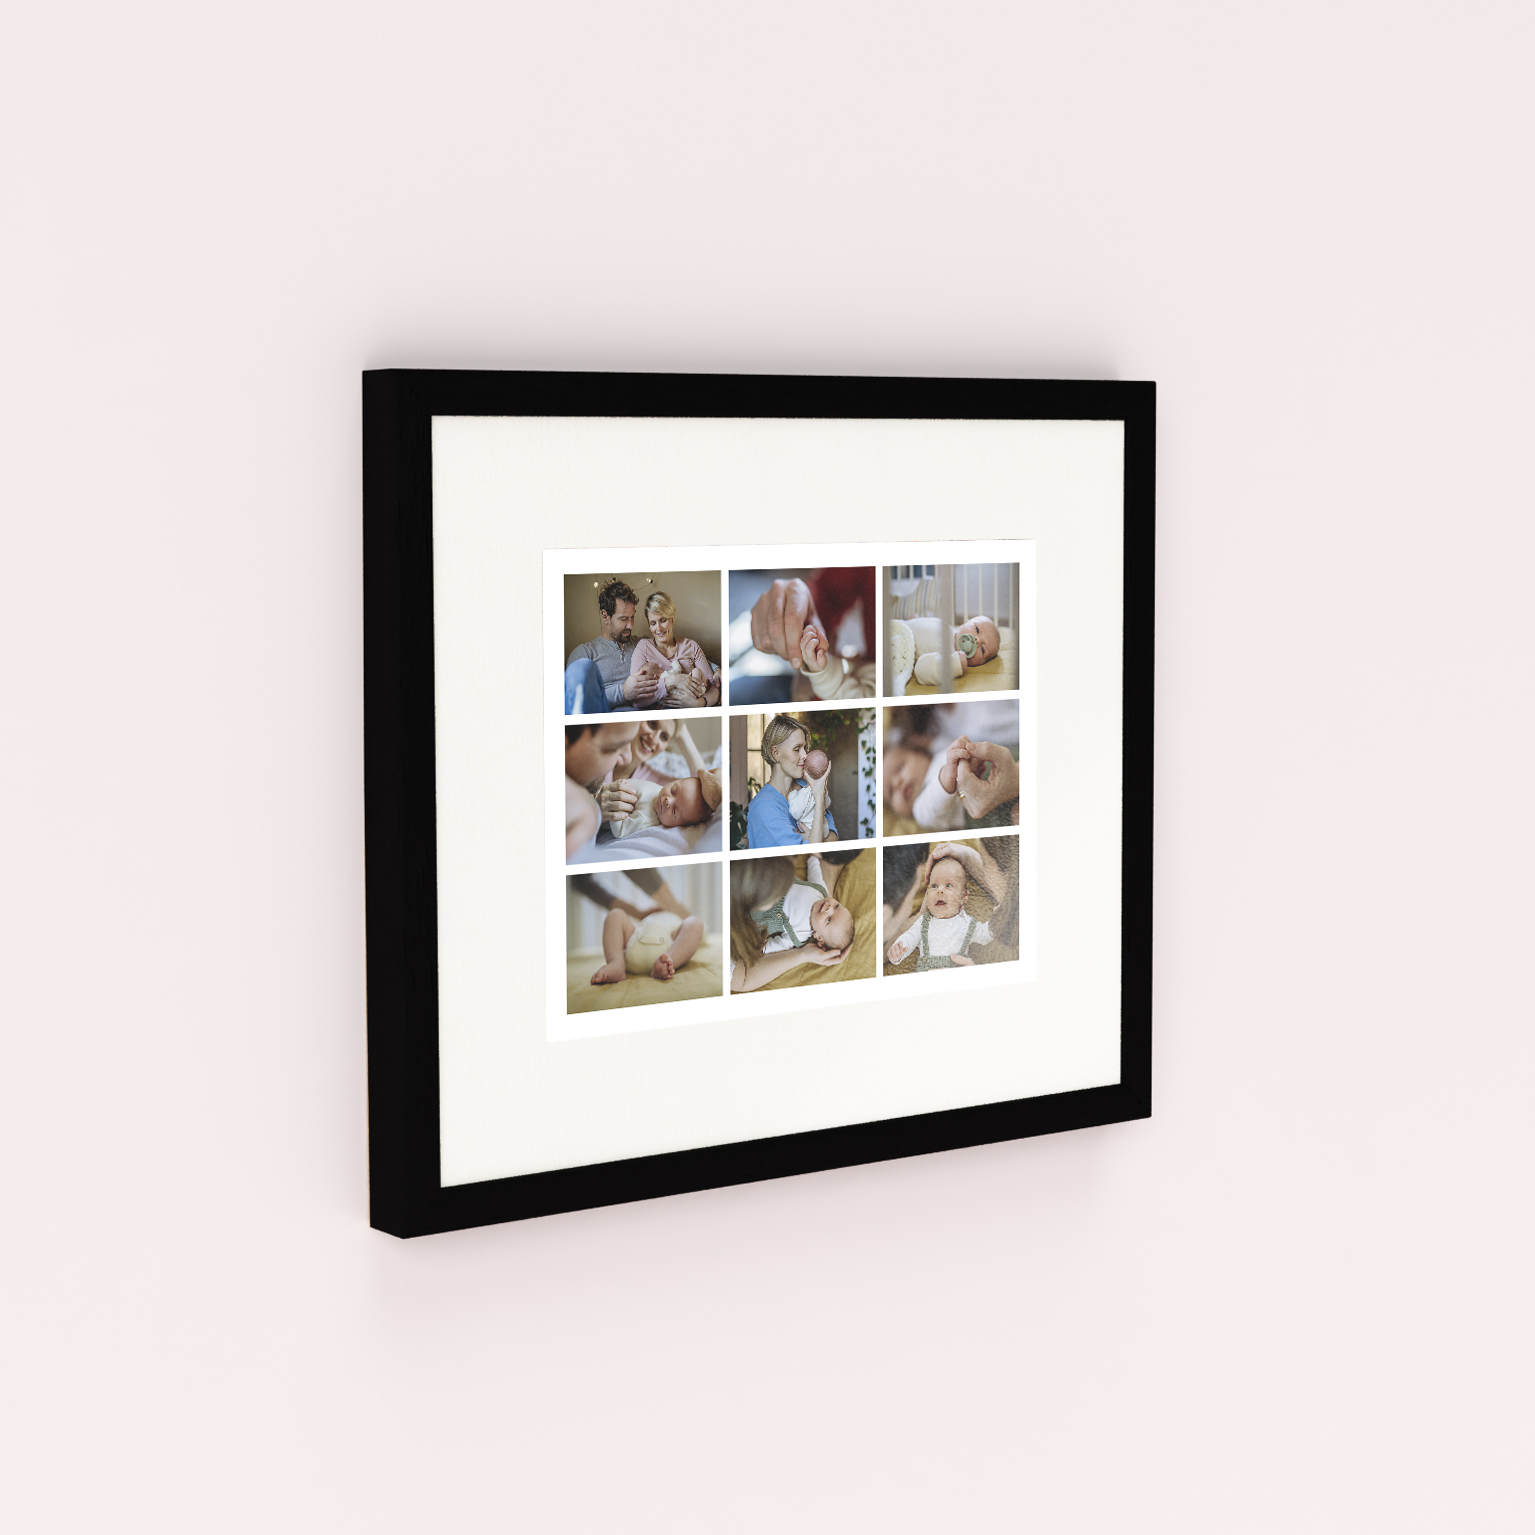 Gallery of Nine Framed Photo Prints - Elegantly preserve and display your memories with this landscape-oriented print offering space for nine photos. Transform them into a sophisticated piece of art crafted with durable acrylic glass for longevity. Ideal for creating a meaningful display of your cherished memories.